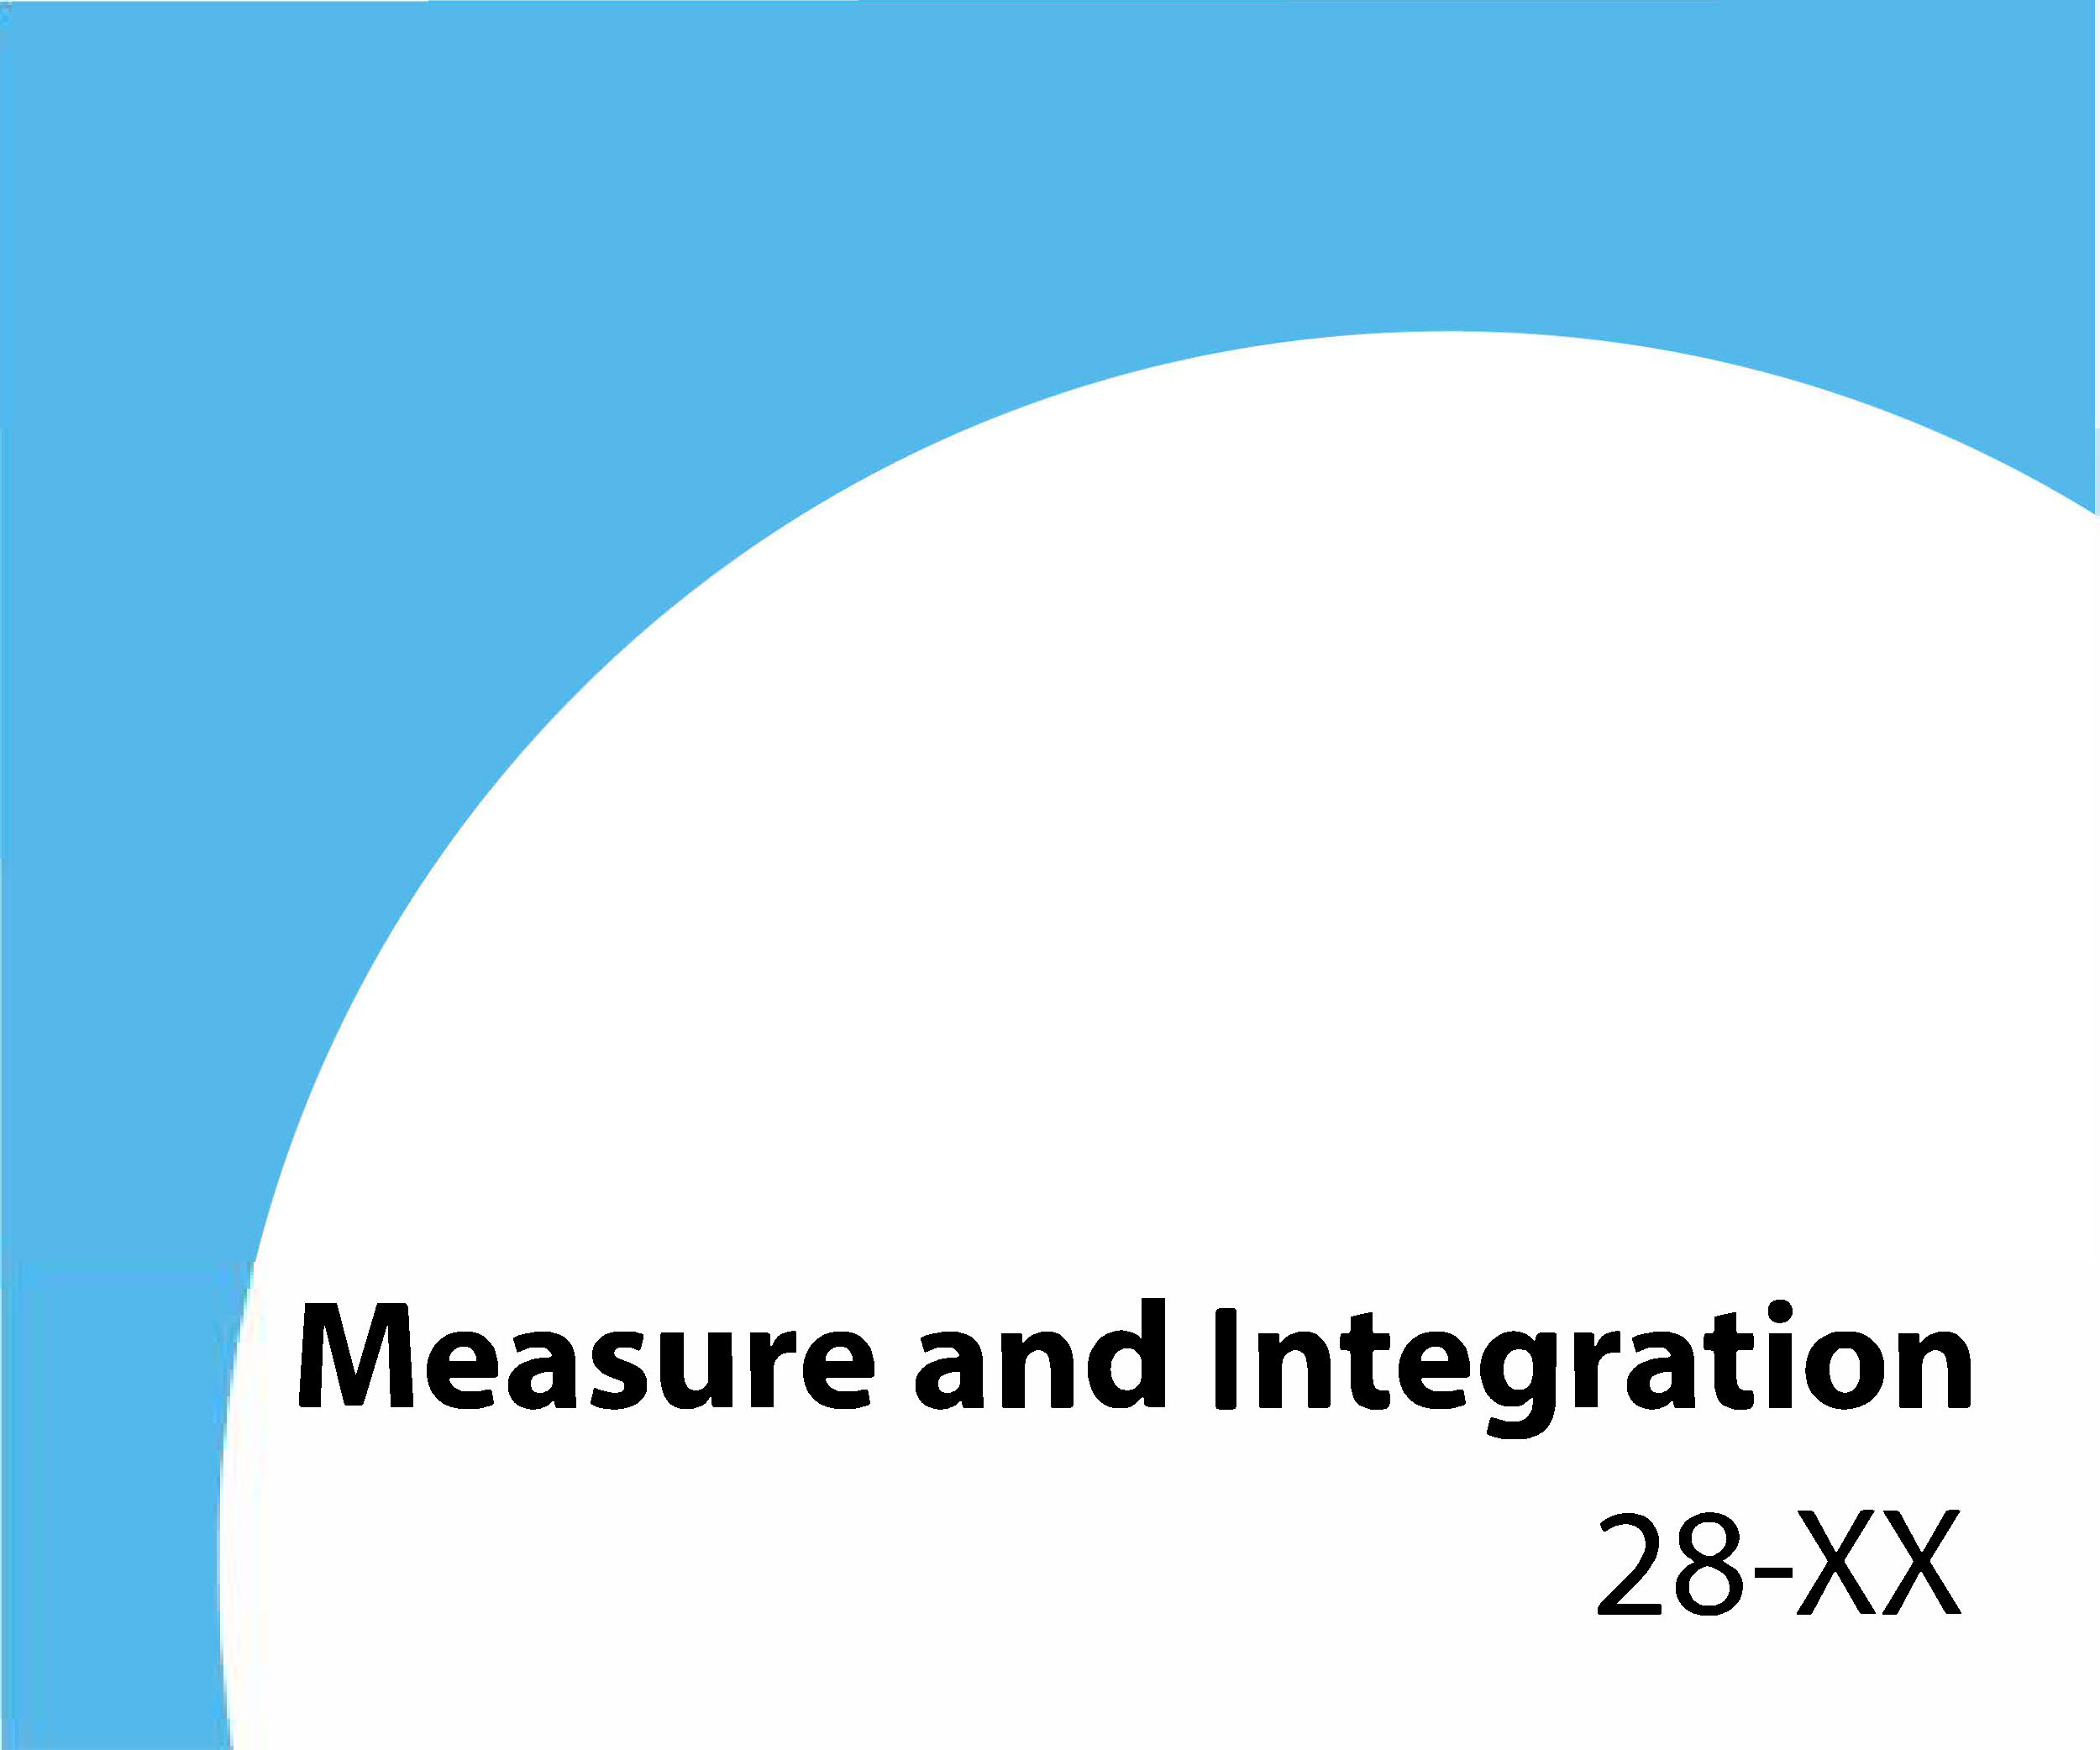 28-XX - Measure and Integration